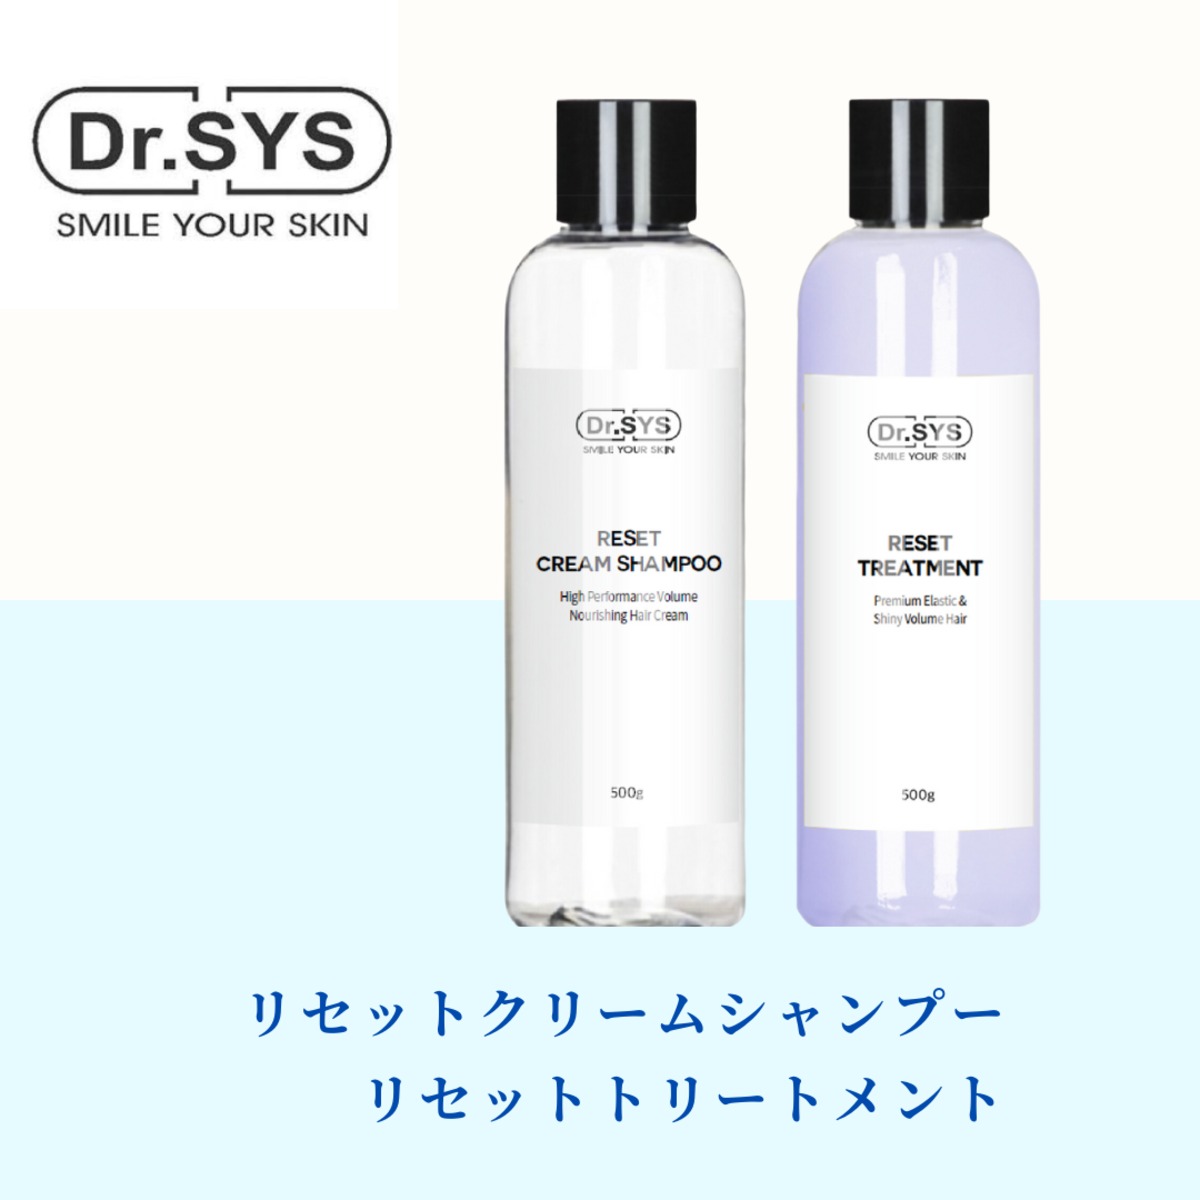 【Dr.SYS】シャンプー&トリートメントセット | salon de glamorous By.milista powered by BASE